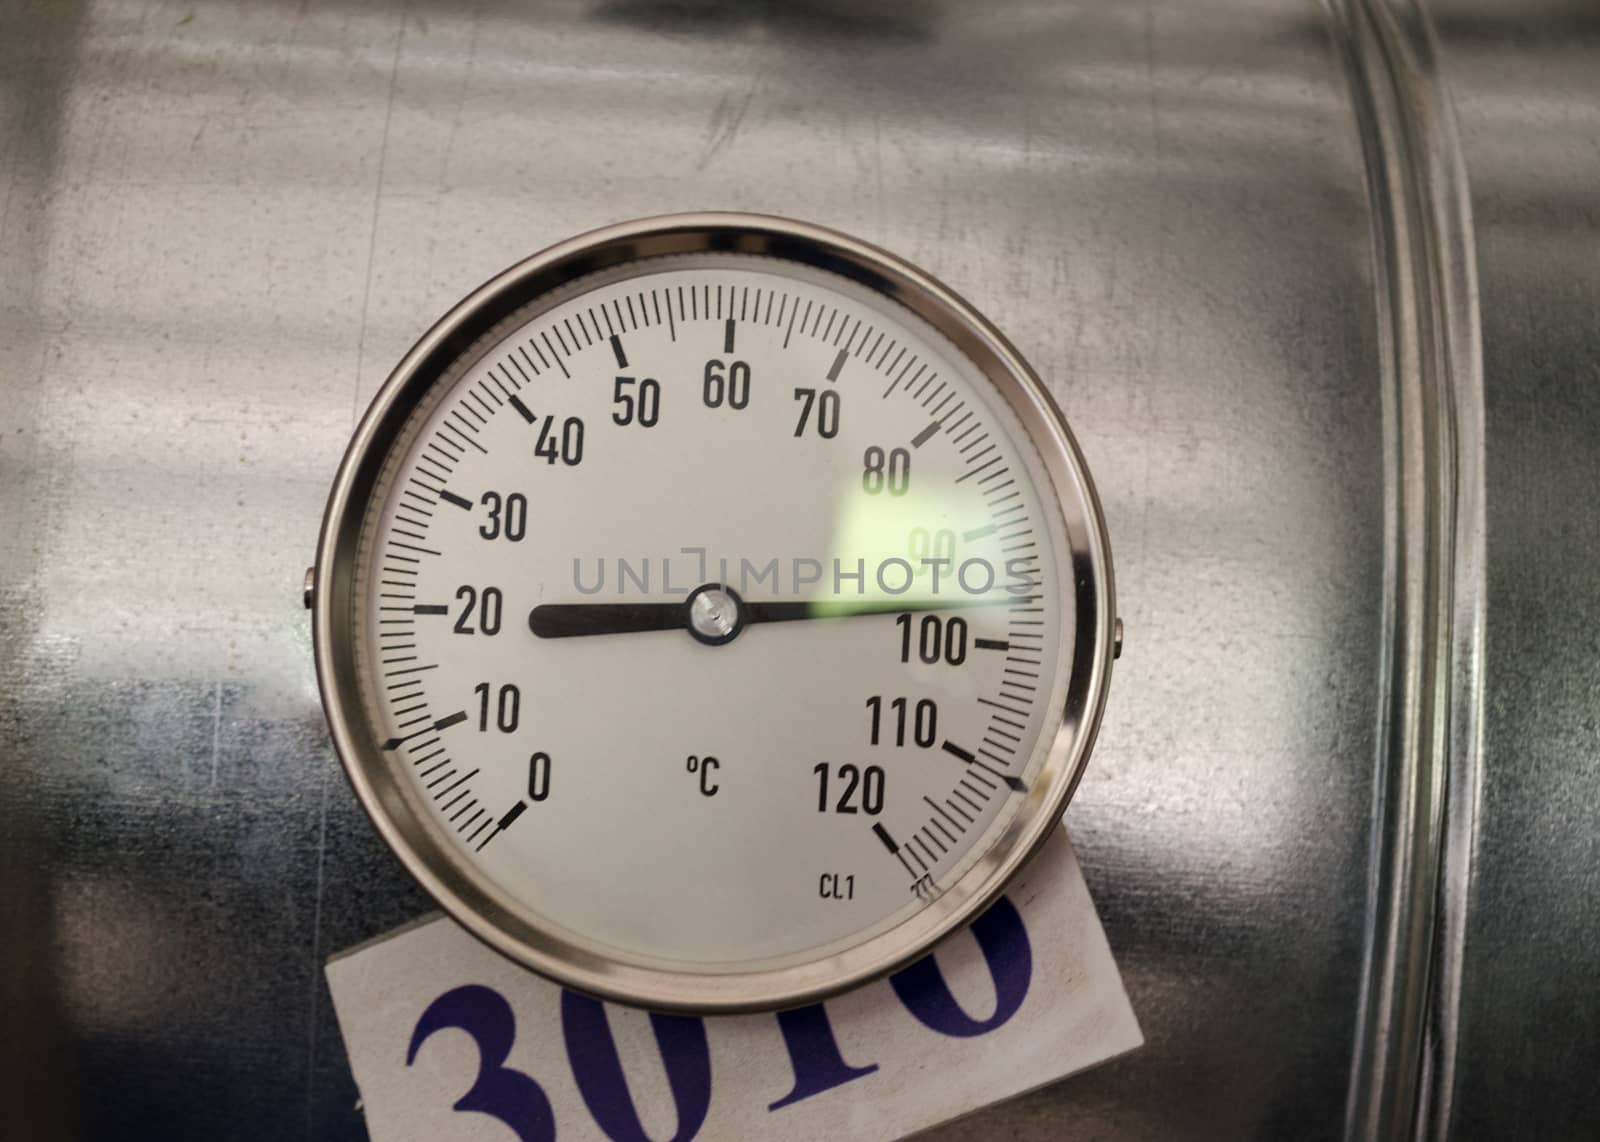 Circular industrial thermometer temperature meter show almost hundred degree celsius.